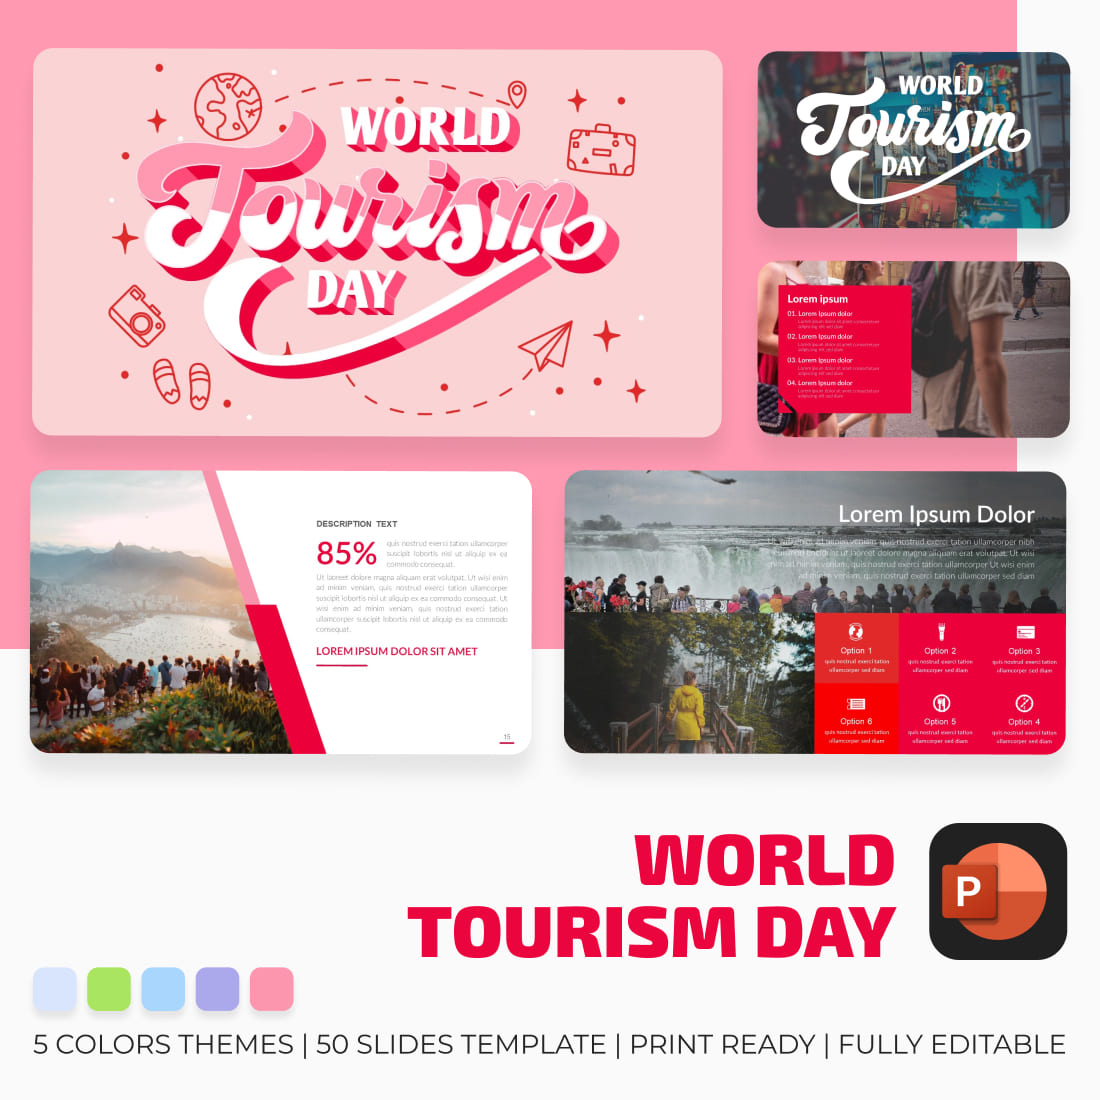 World Tourism Day PowerPoint Template main cover.